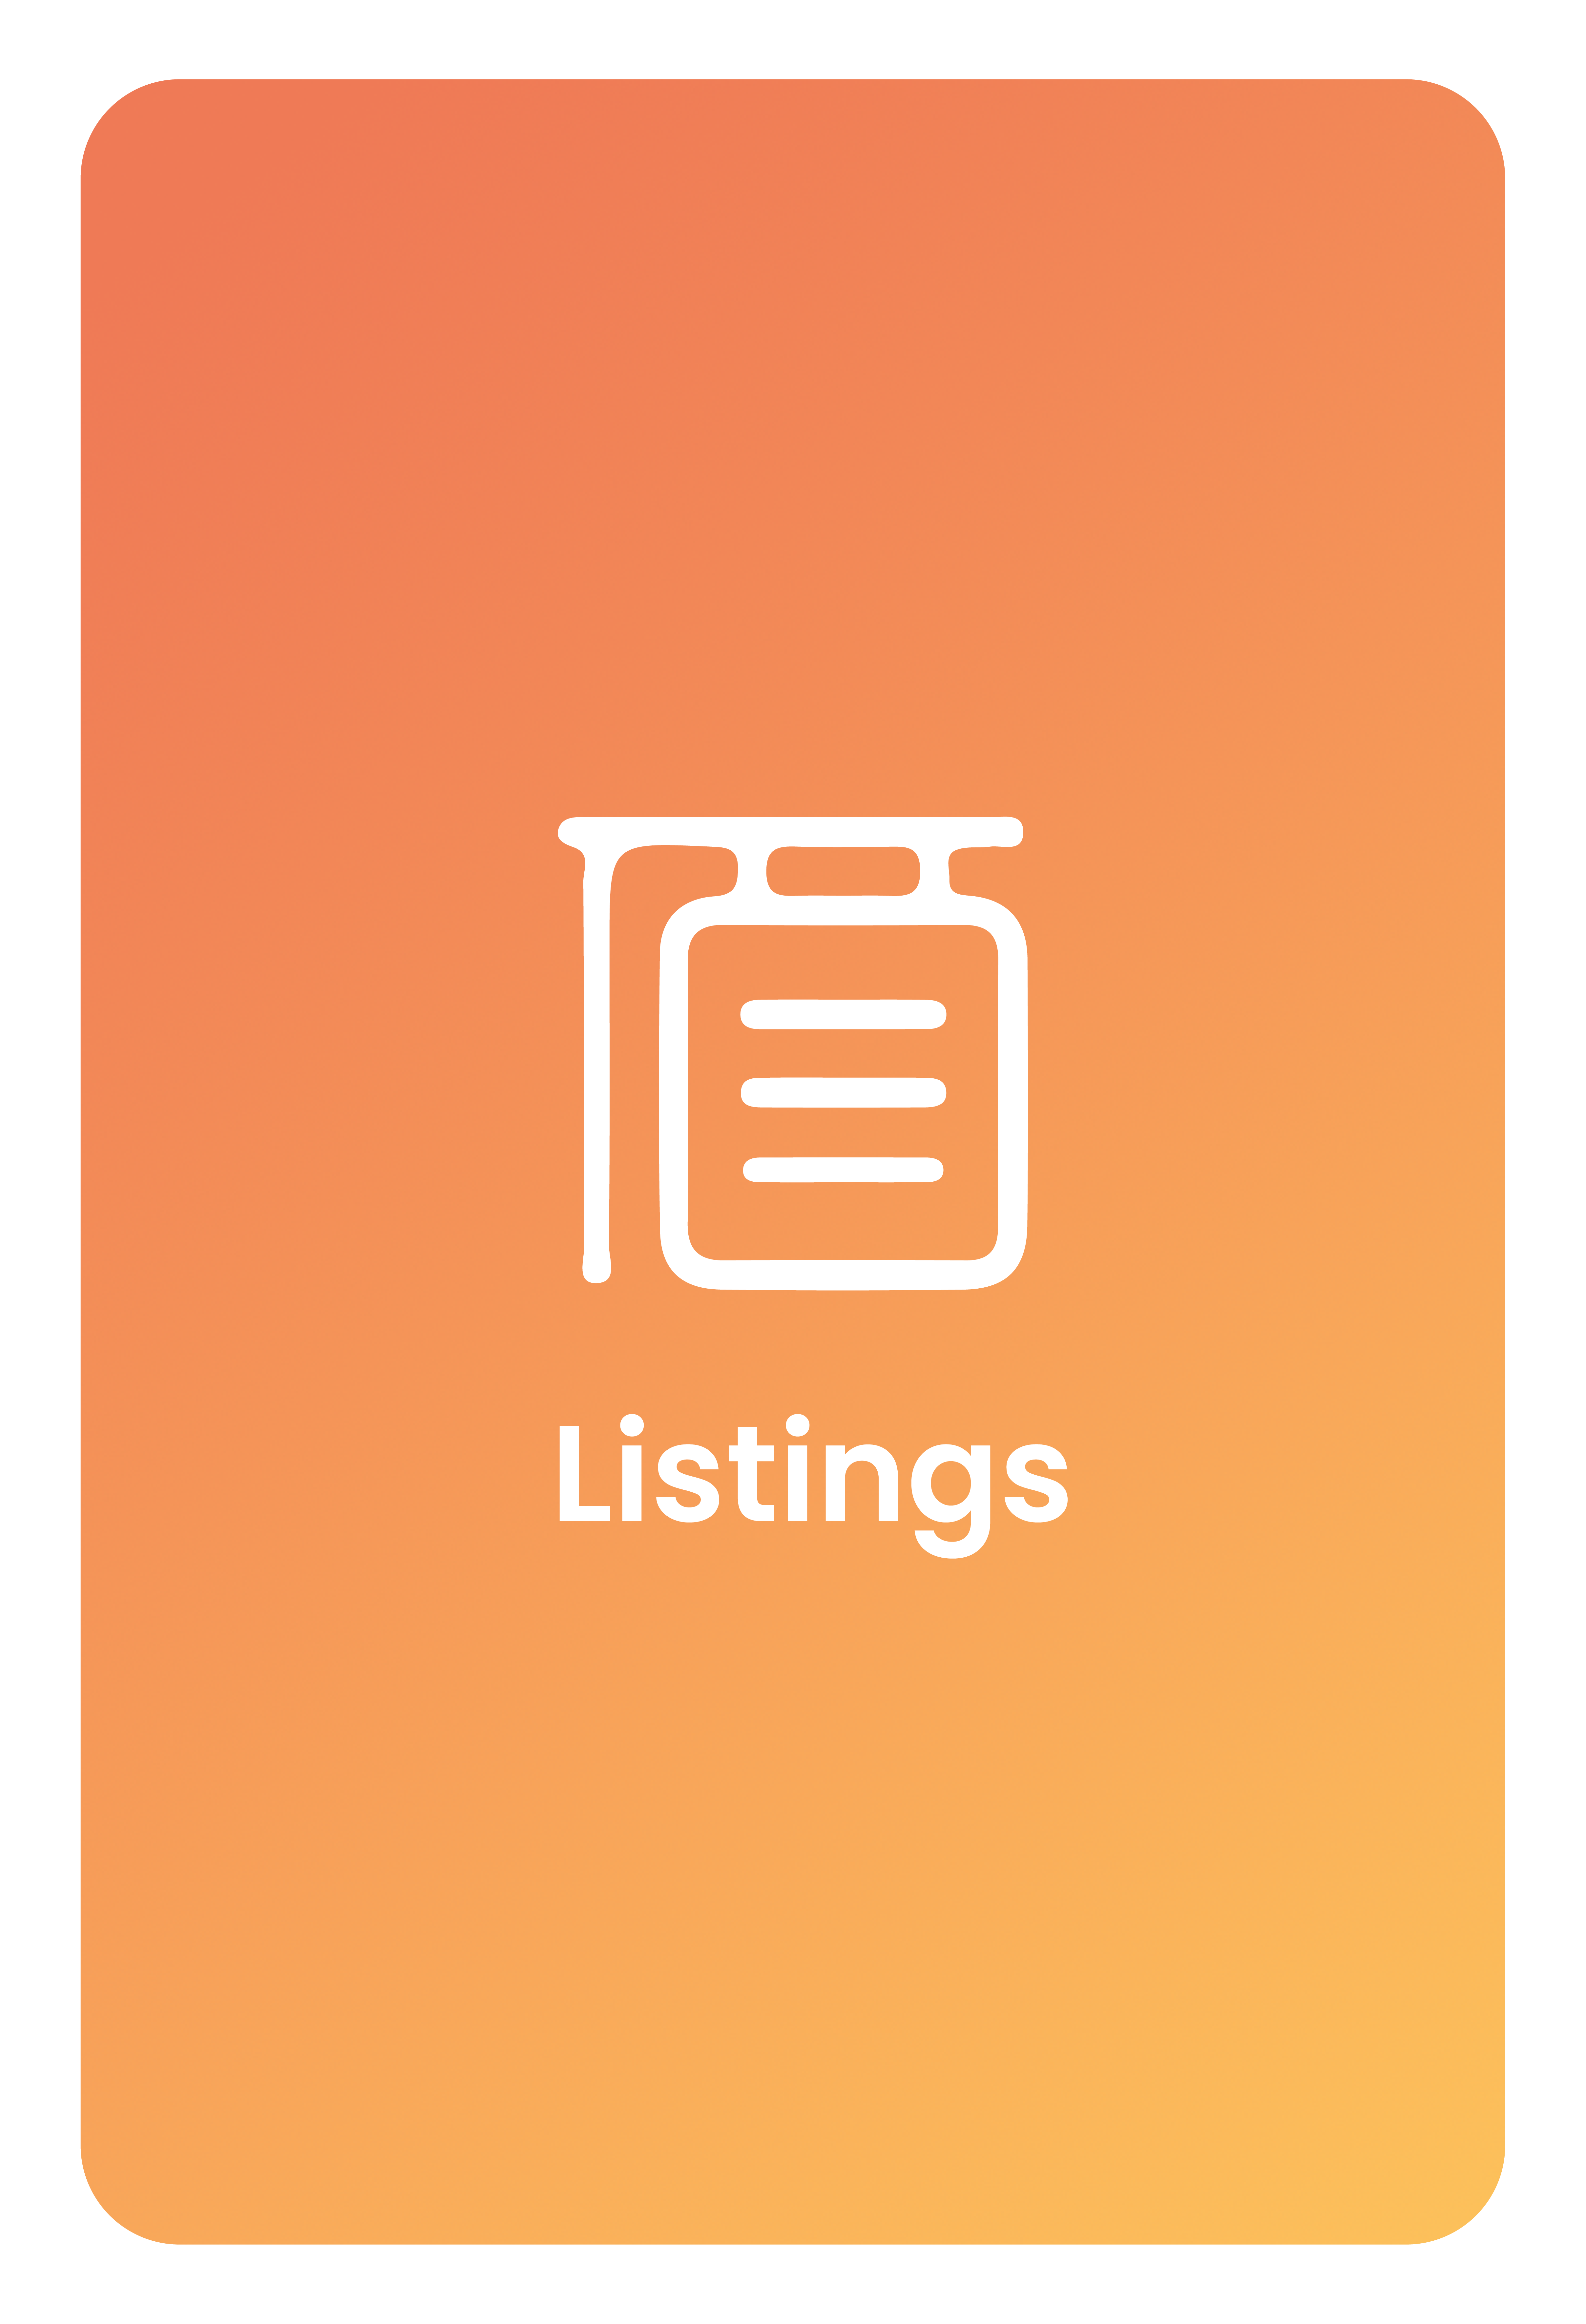 Orange rounded rectangular image with title 'Listings'; when moused over, it says: -Easy to use home search and scheduling. -Batch schedule showings and route builder. -Saved showing information in case of dropped service. -Integration with your preferred calendar. -Monthly automated market reports. -Empower sellers to approve, deny, and set their listings availability for showings. -We don't sell agent data